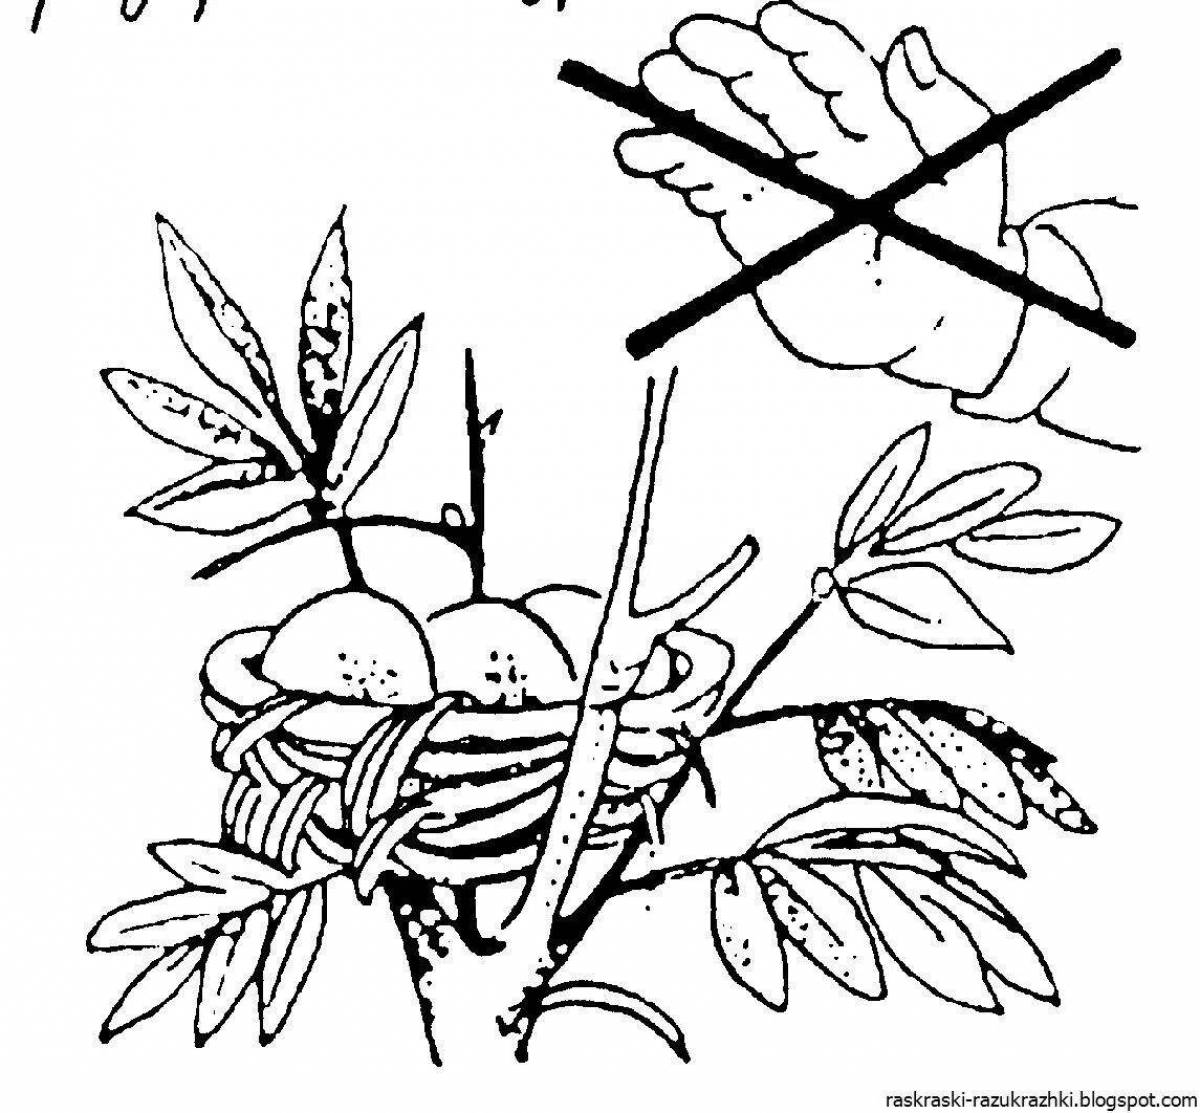 Exciting eco sign coloring pages for kids